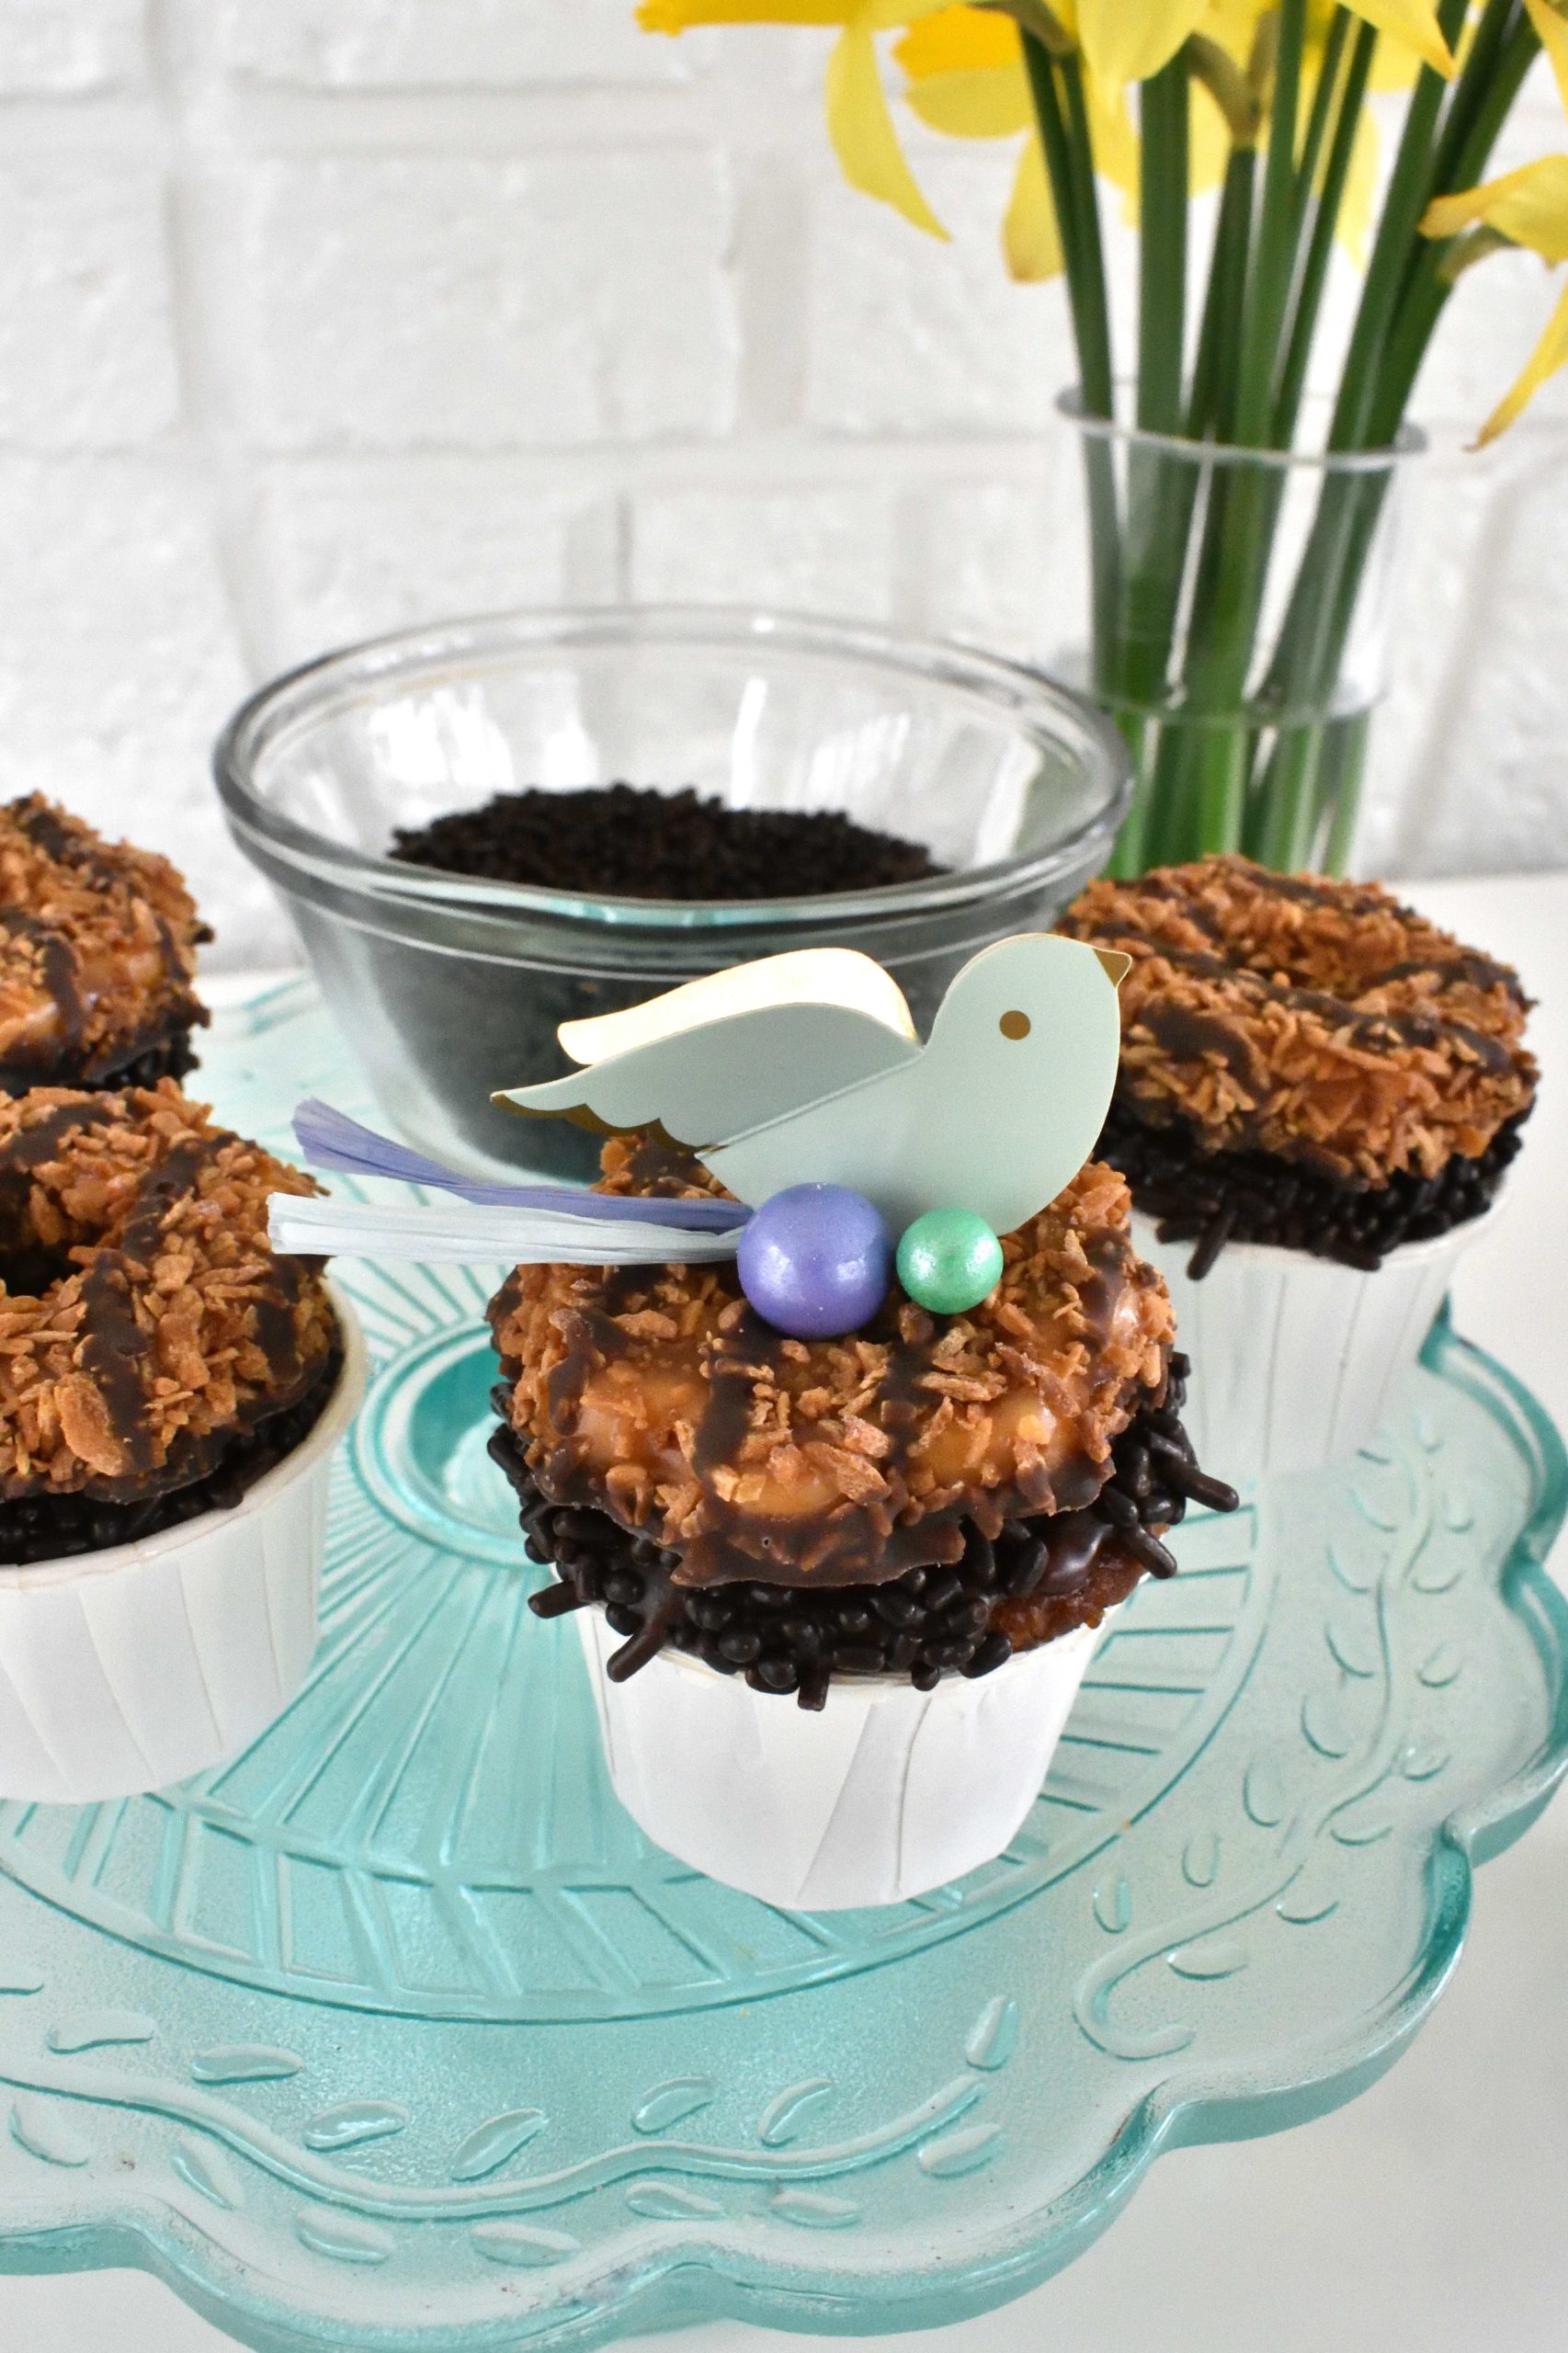 DIY Easter grazing board with bird nest cupcakes